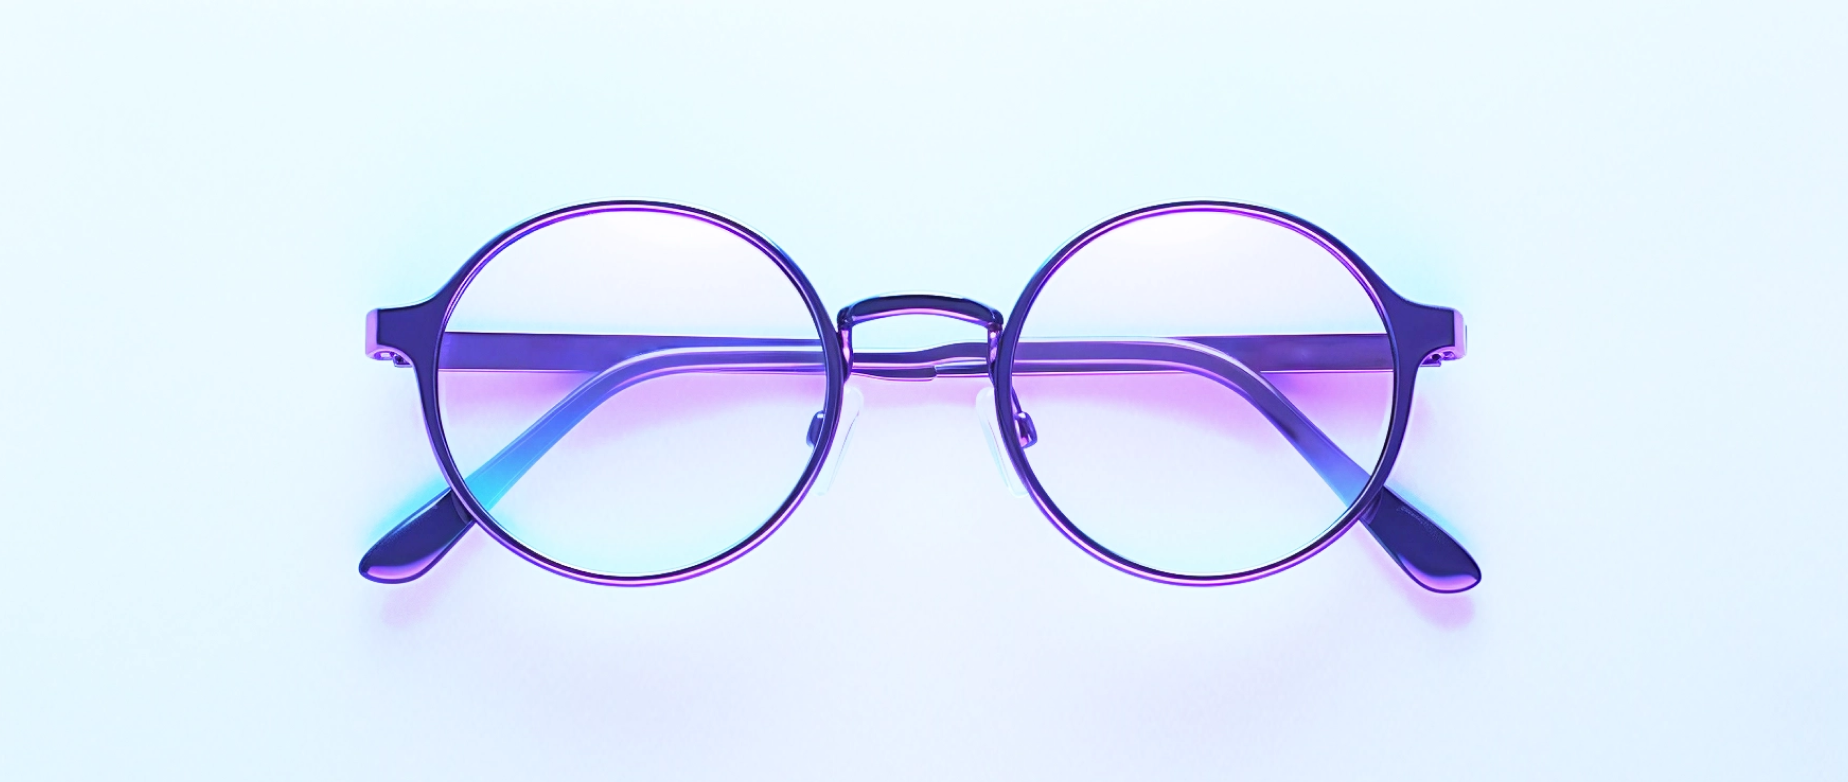 A pair of glasses folded on a light blue background.